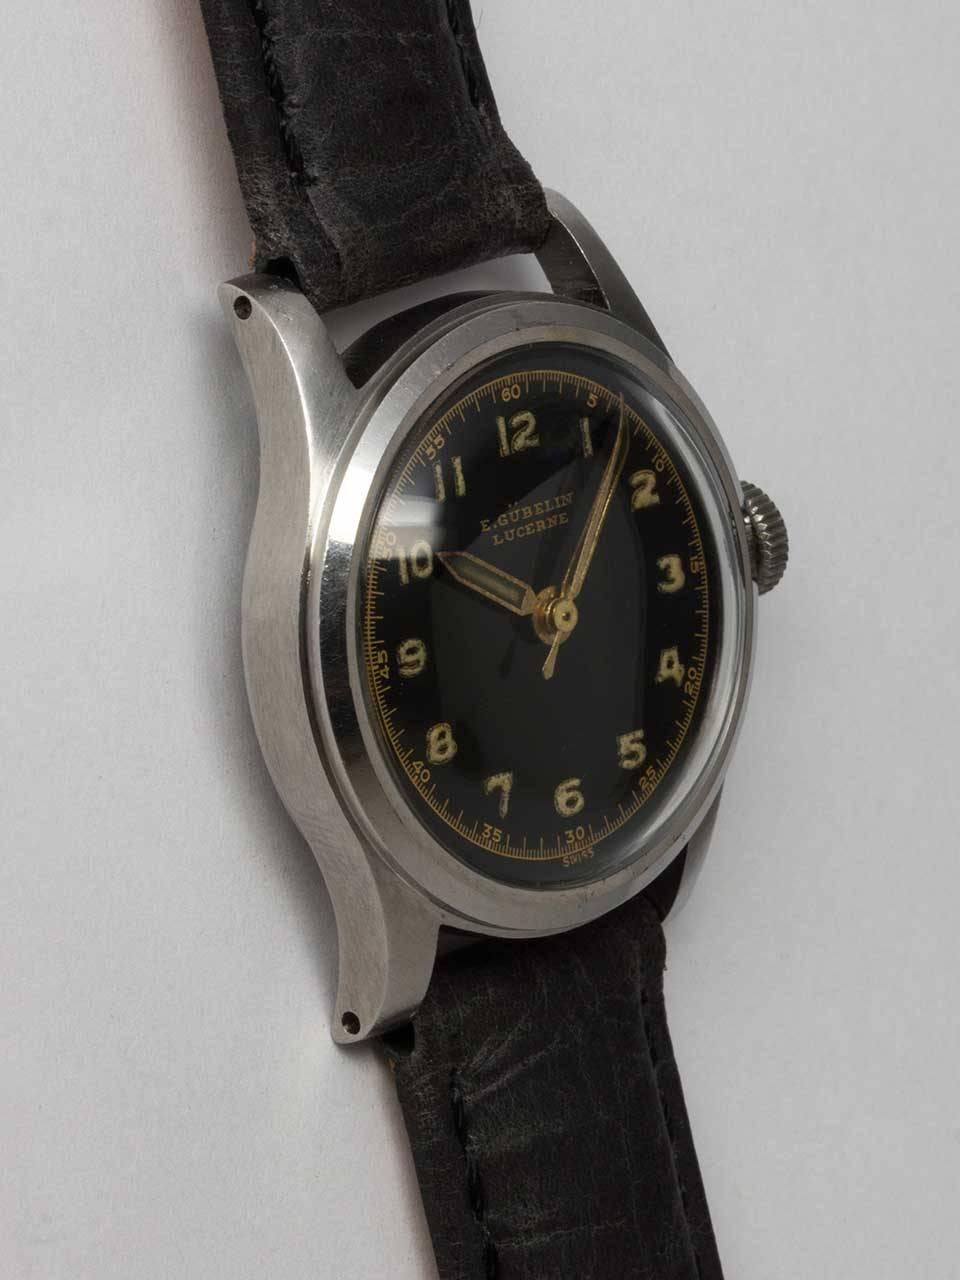 Gubelin Stainless Steel Military Style Wristwatch circa 1940s. Small case measuring 29 x 34mm diameter. Original glossy black dial with gilt printing, patina'd luminous Arabic indexes and luminous pencil hands. Powered by 17 jewel manual wind